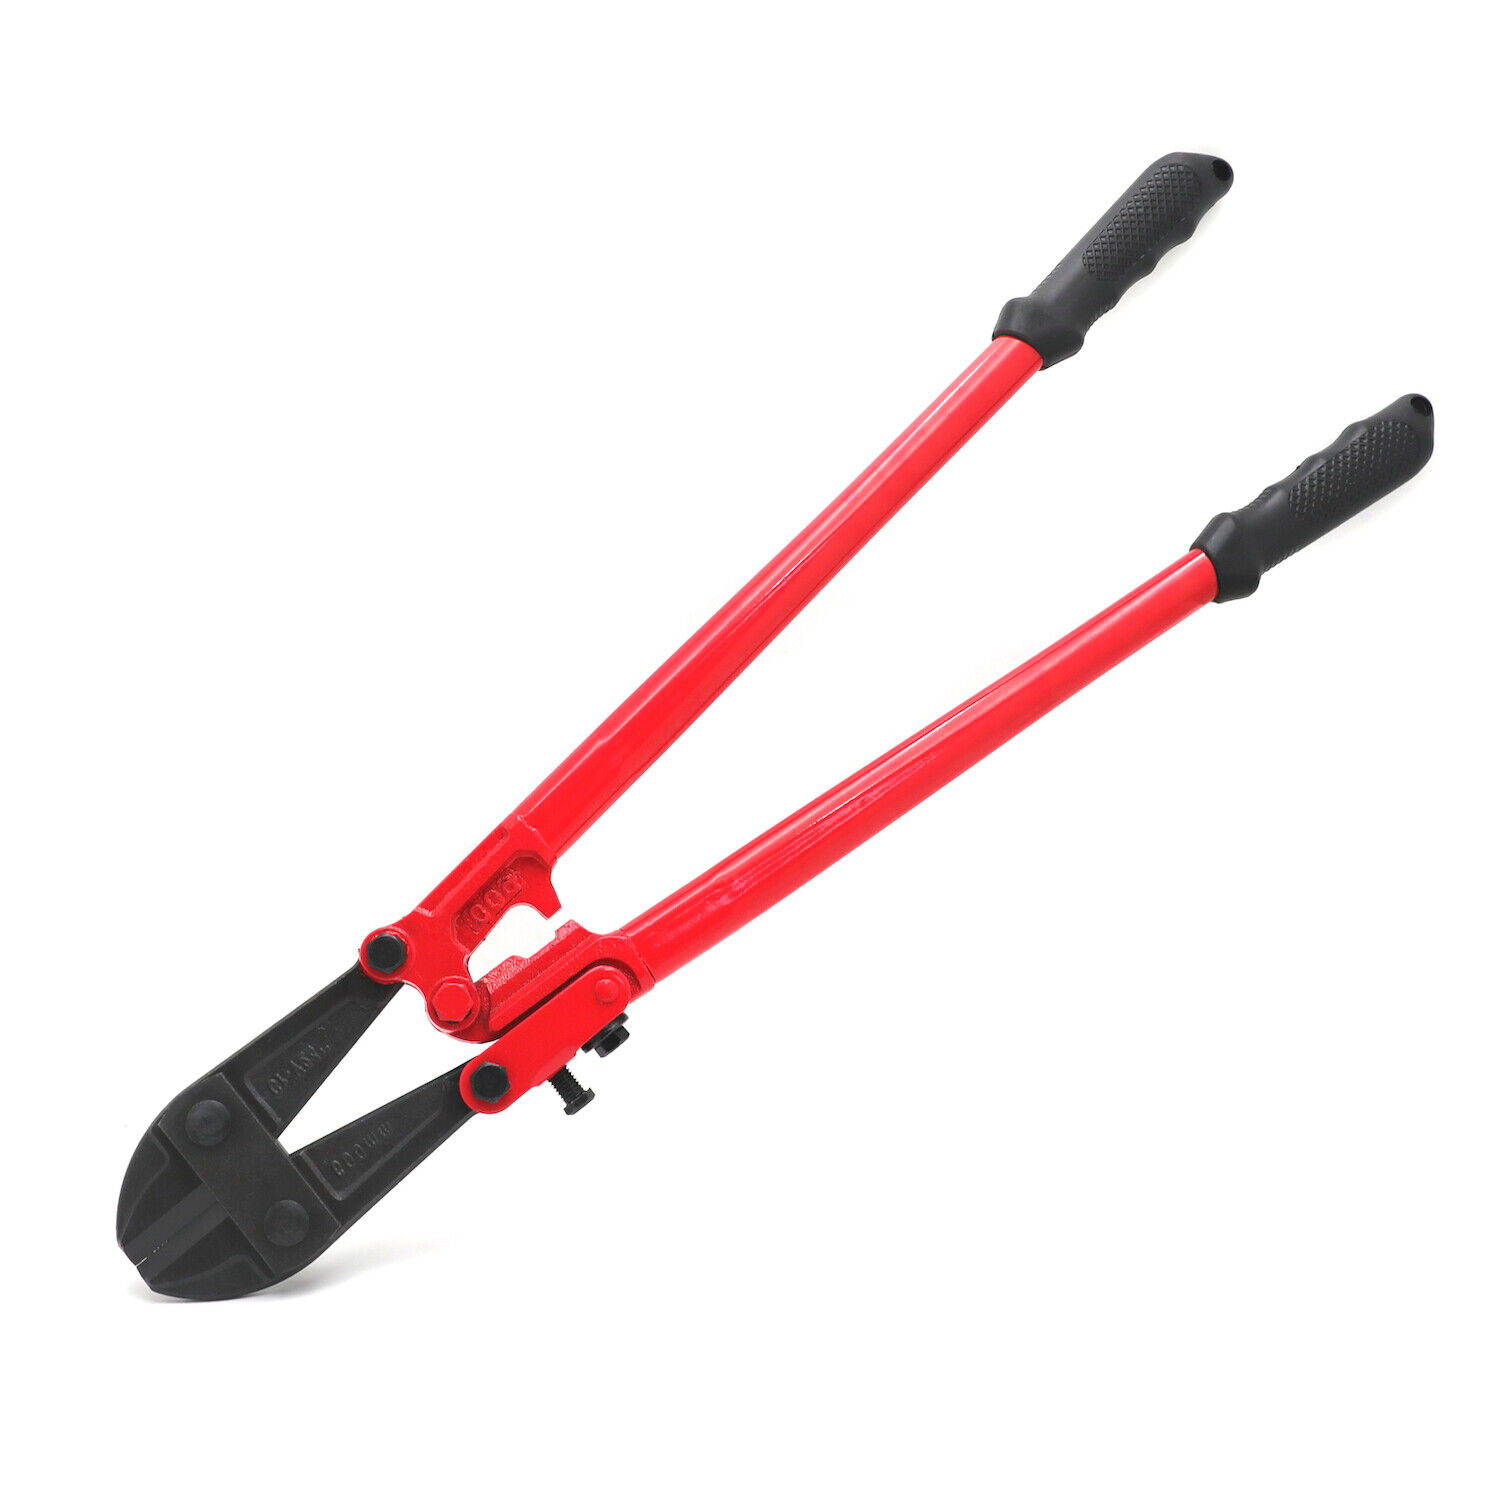 24" Bolt Cutter- 8mm Capacity Industrial Grade Wire Cut Steel Cable Cut Home